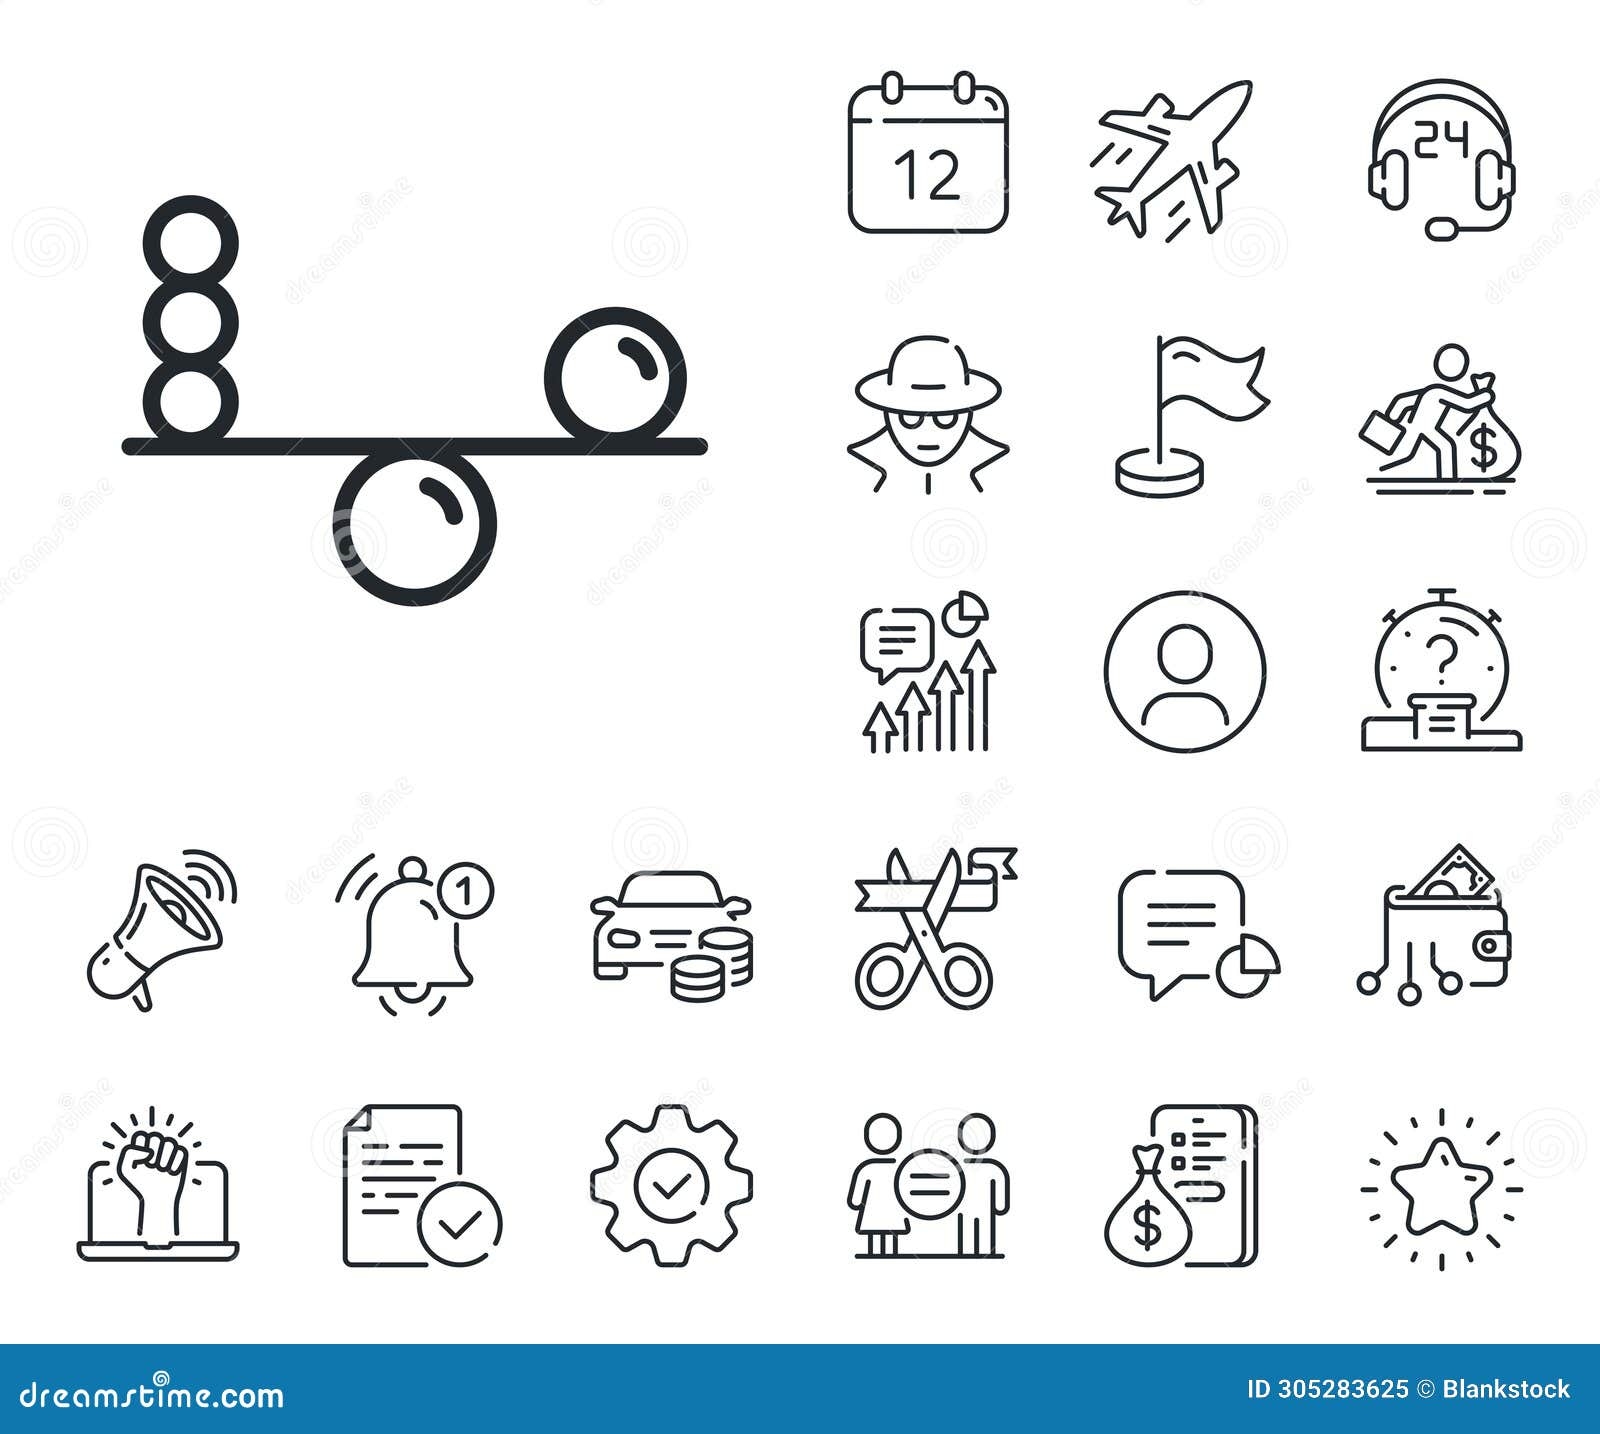 balance line icon. mind stability sign. salaryman, gender equality and alert bell. 